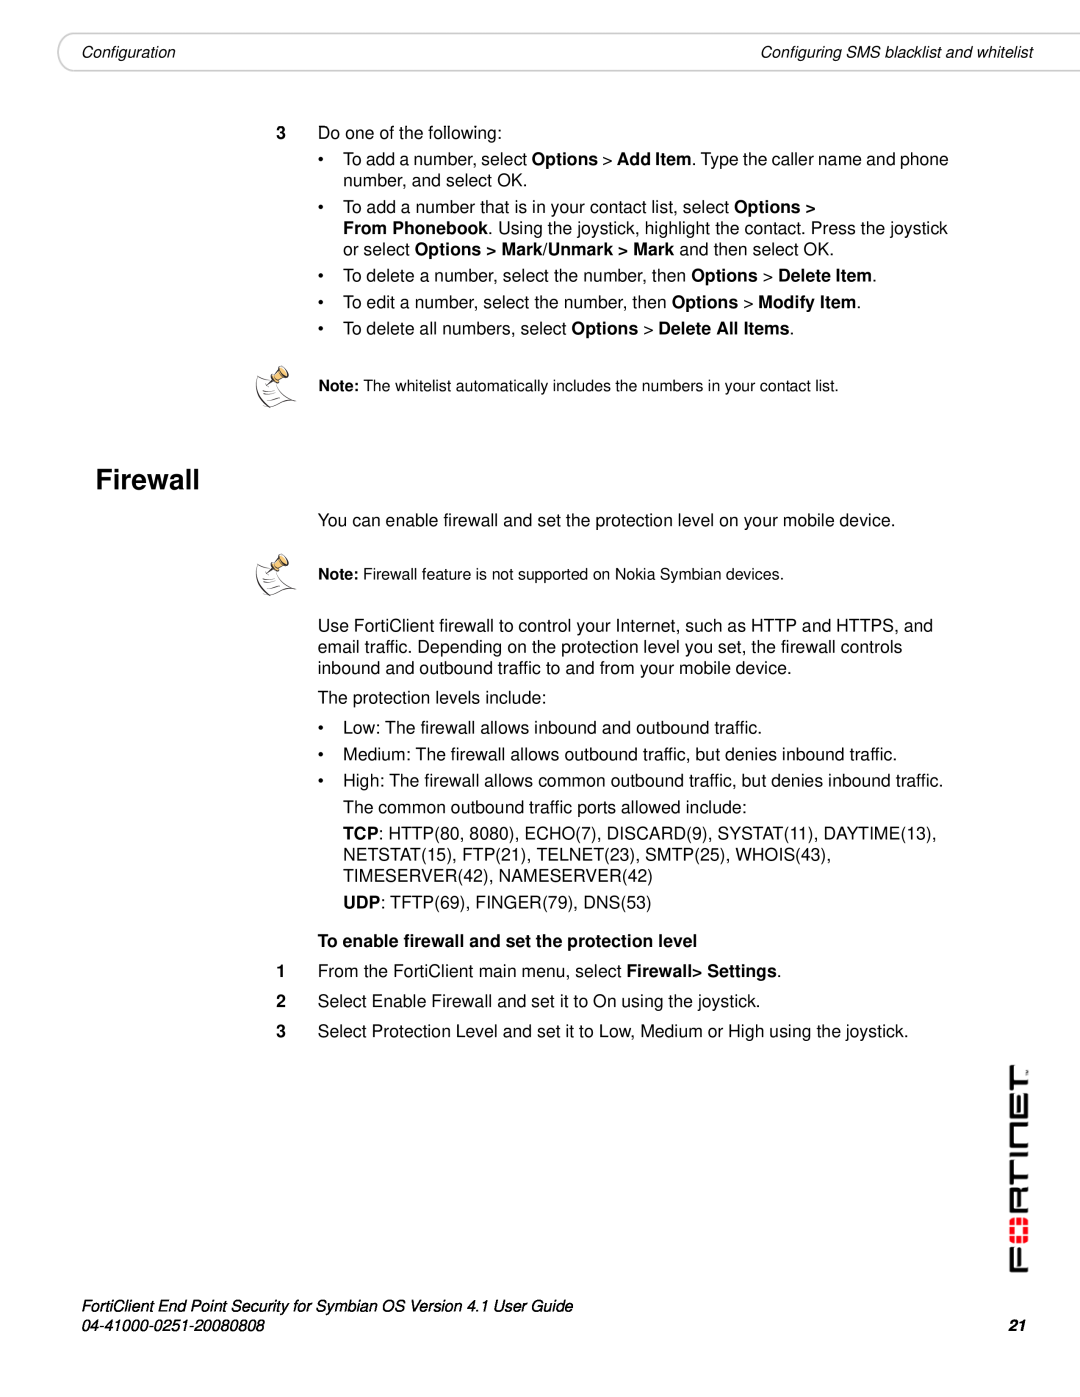 Fortinet Version 4.1 manual Firewall, To enable firewall and set the protection level 